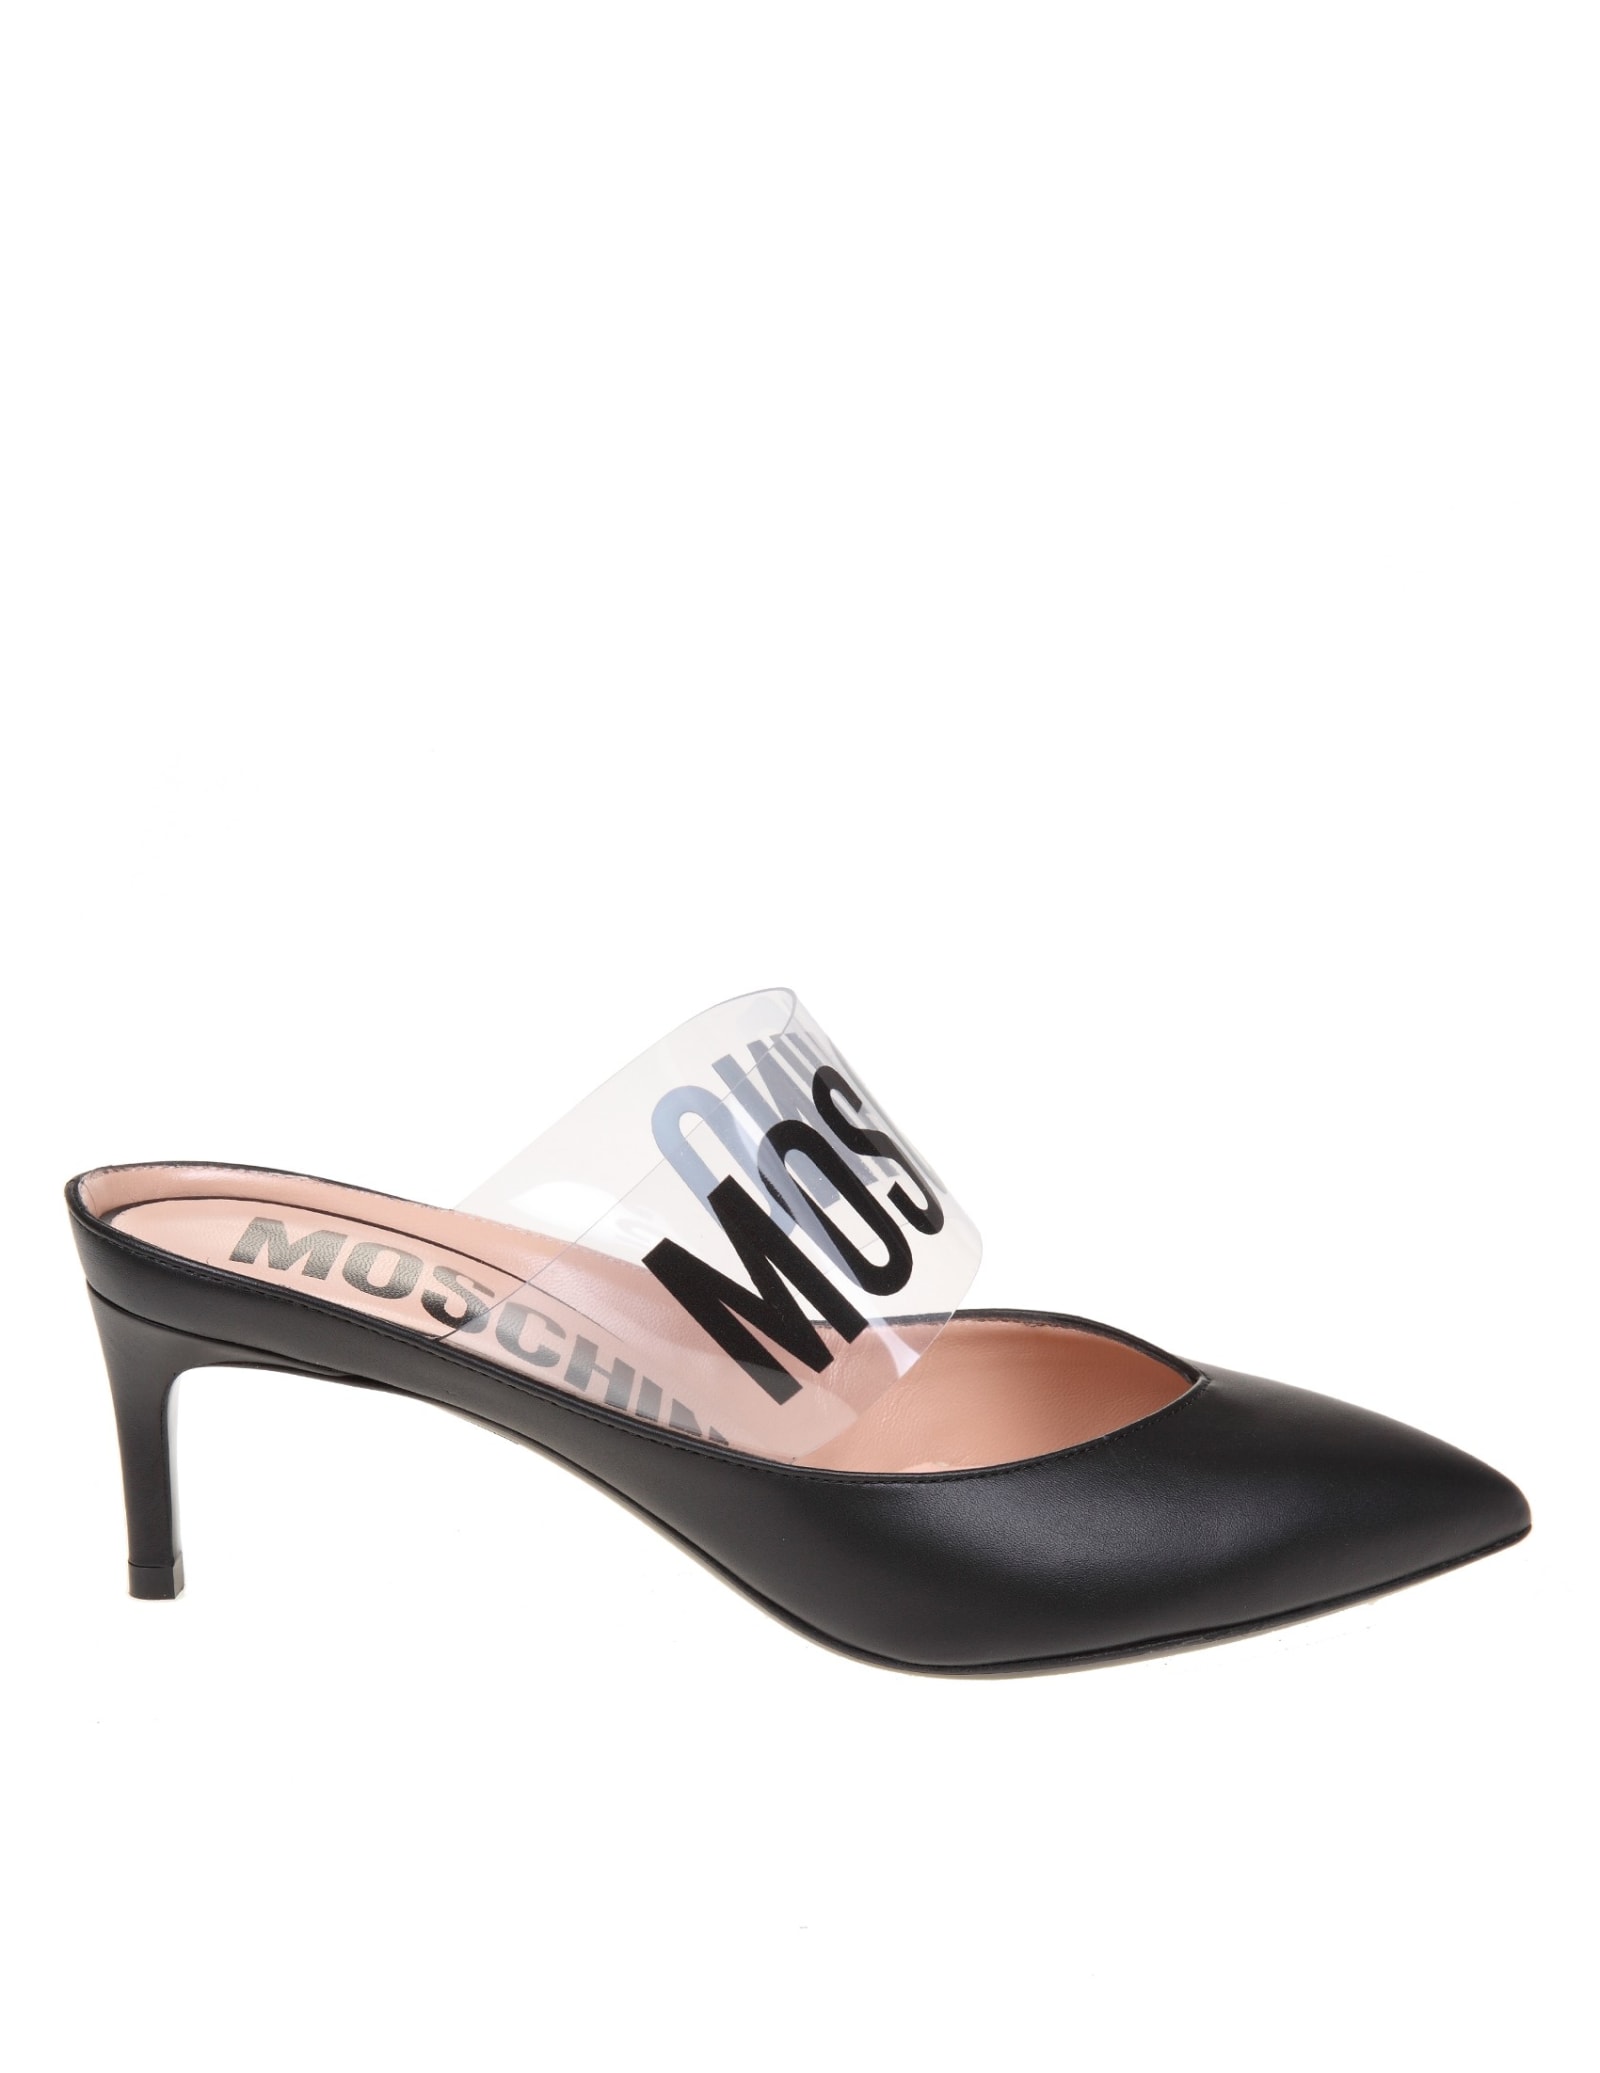 Buy Moschino Mules In Black Leather online, shop Moschino shoes with free shipping